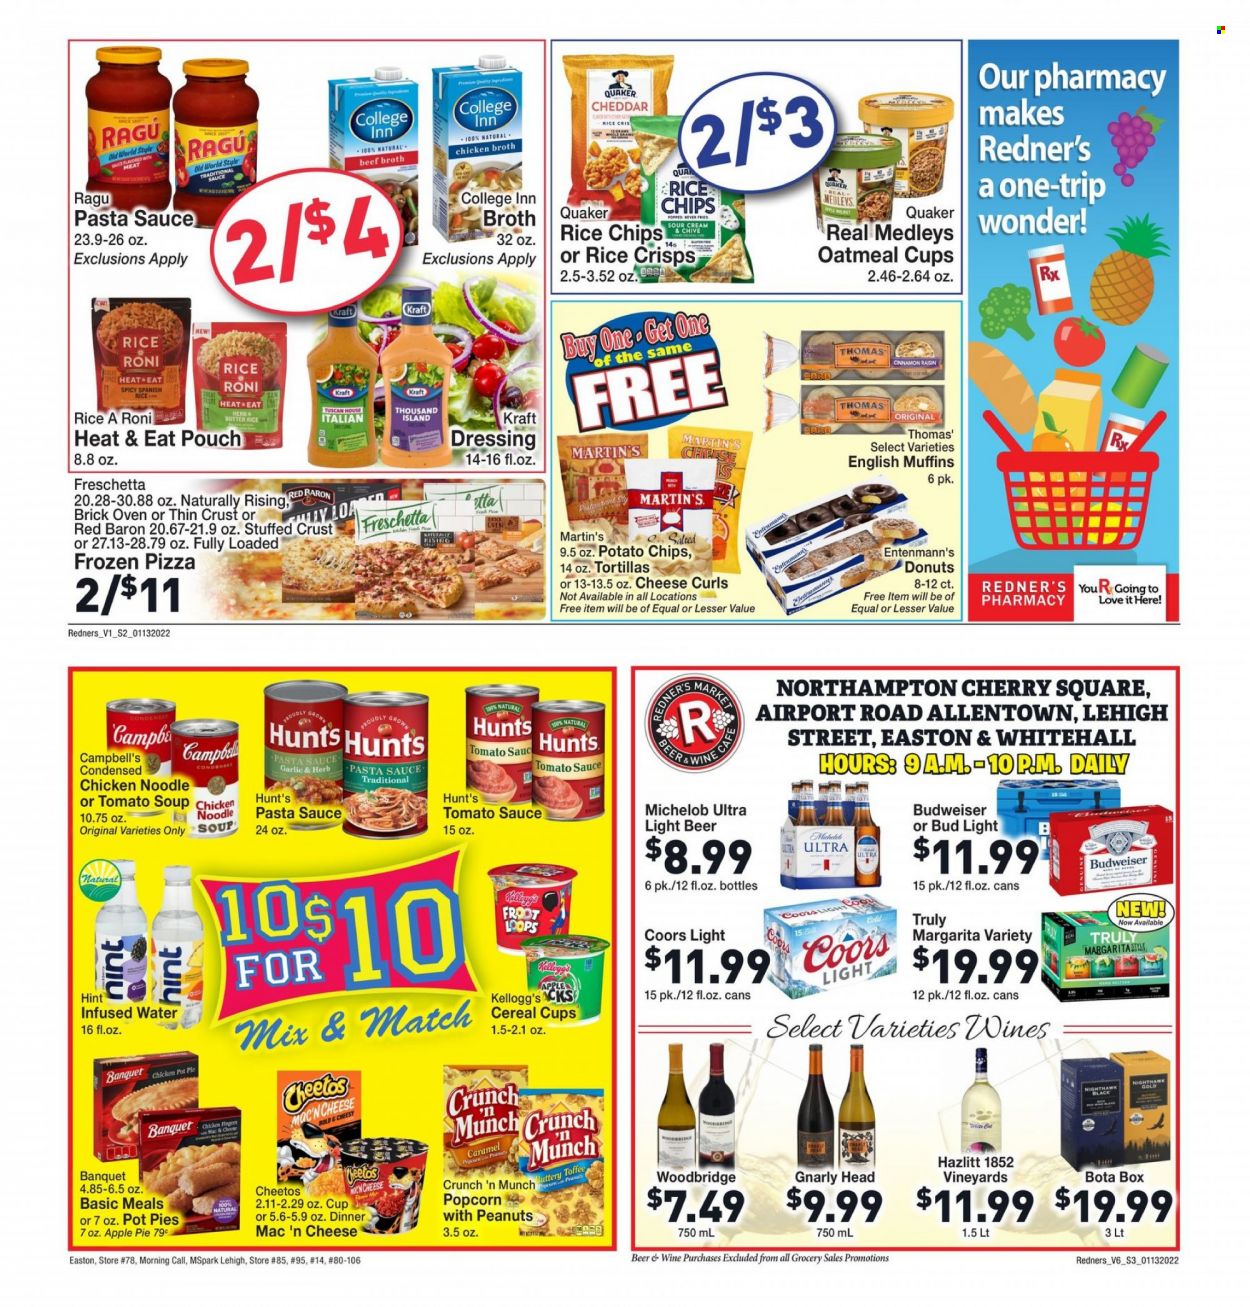 thumbnail - Redner's Markets Flyer - 01/13/2022 - 01/19/2022 - Sales products - english muffins, tortillas, pie, apple pie, pot pie, donut, Entenmann's, Campbell's, tomato soup, pizza, pasta sauce, soup, sauce, Quaker, noodles, Kraft®, ragú pasta, butter, Thousand Island dressing, Red Baron, toffee, Kellogg's, potato chips, Cheetos, rice crisps, beef broth, chicken broth, oatmeal, broth, tomato sauce, cereals, rice, caramel, dressing, ragu, Woodbridge, TRULY, beer, Bud Light, Budweiser, Coors, Michelob. Page 3.